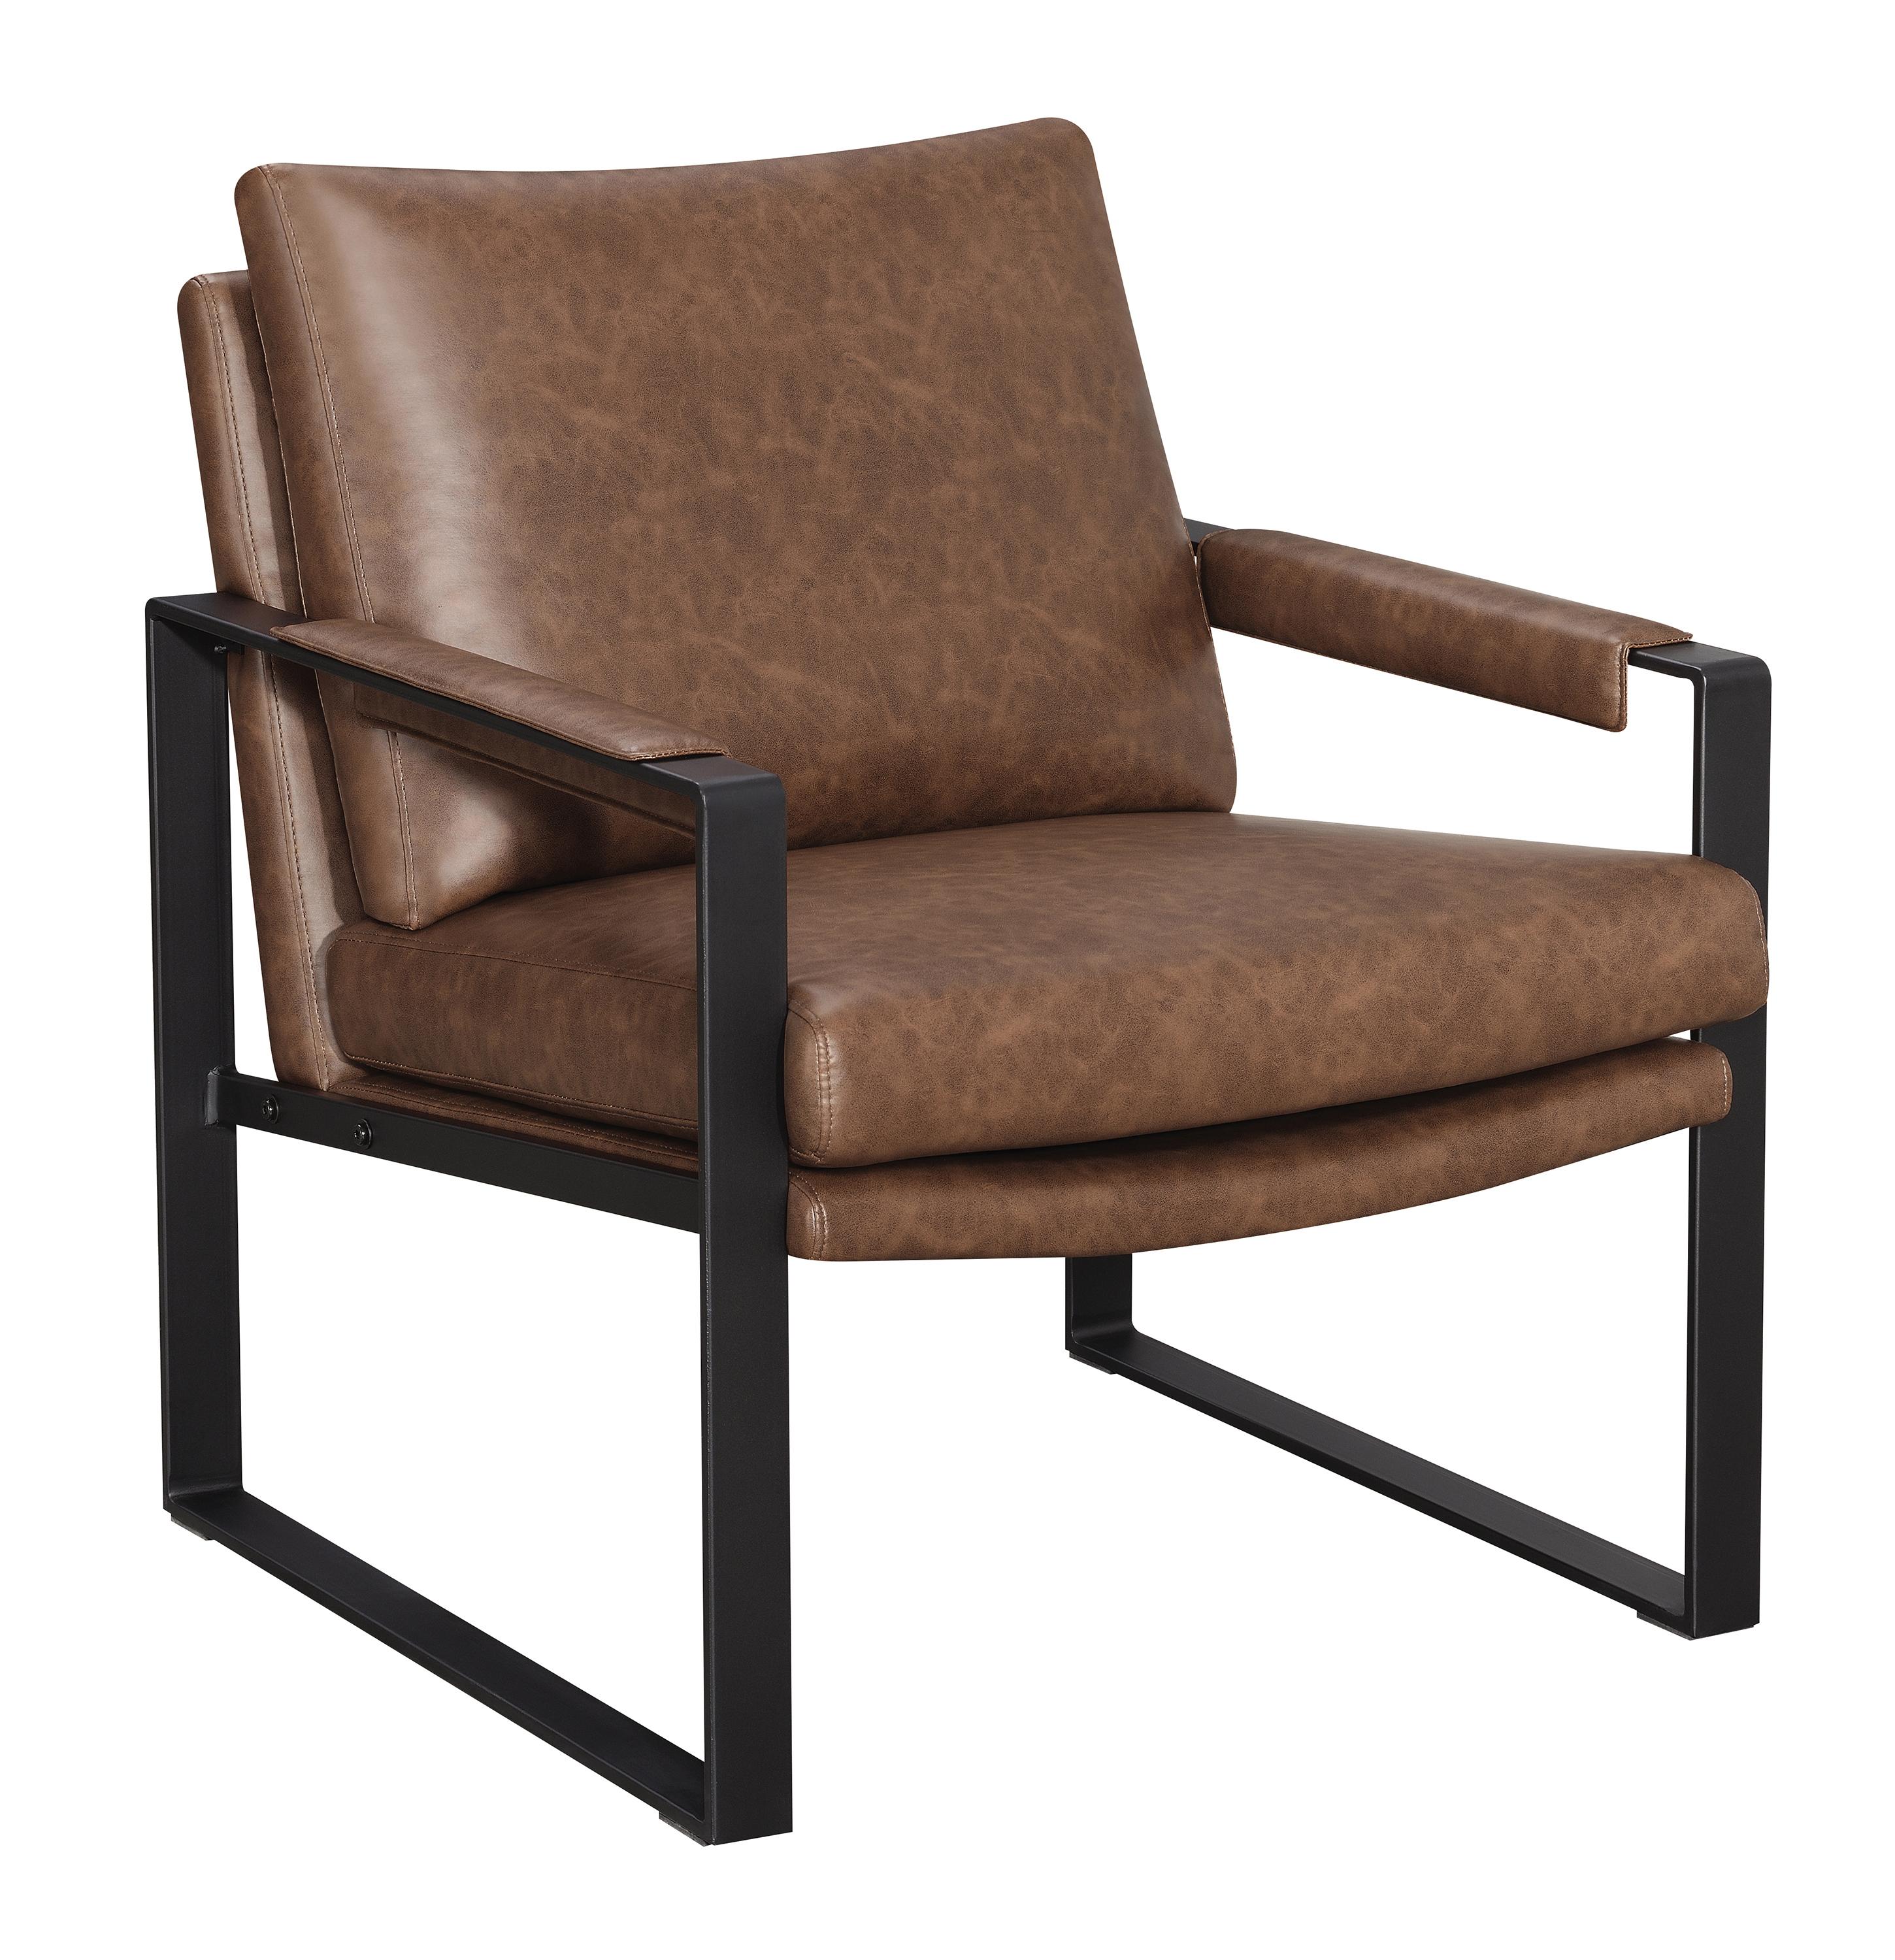 Modern Accent Chair 904112 904112 in Brown Leatherette